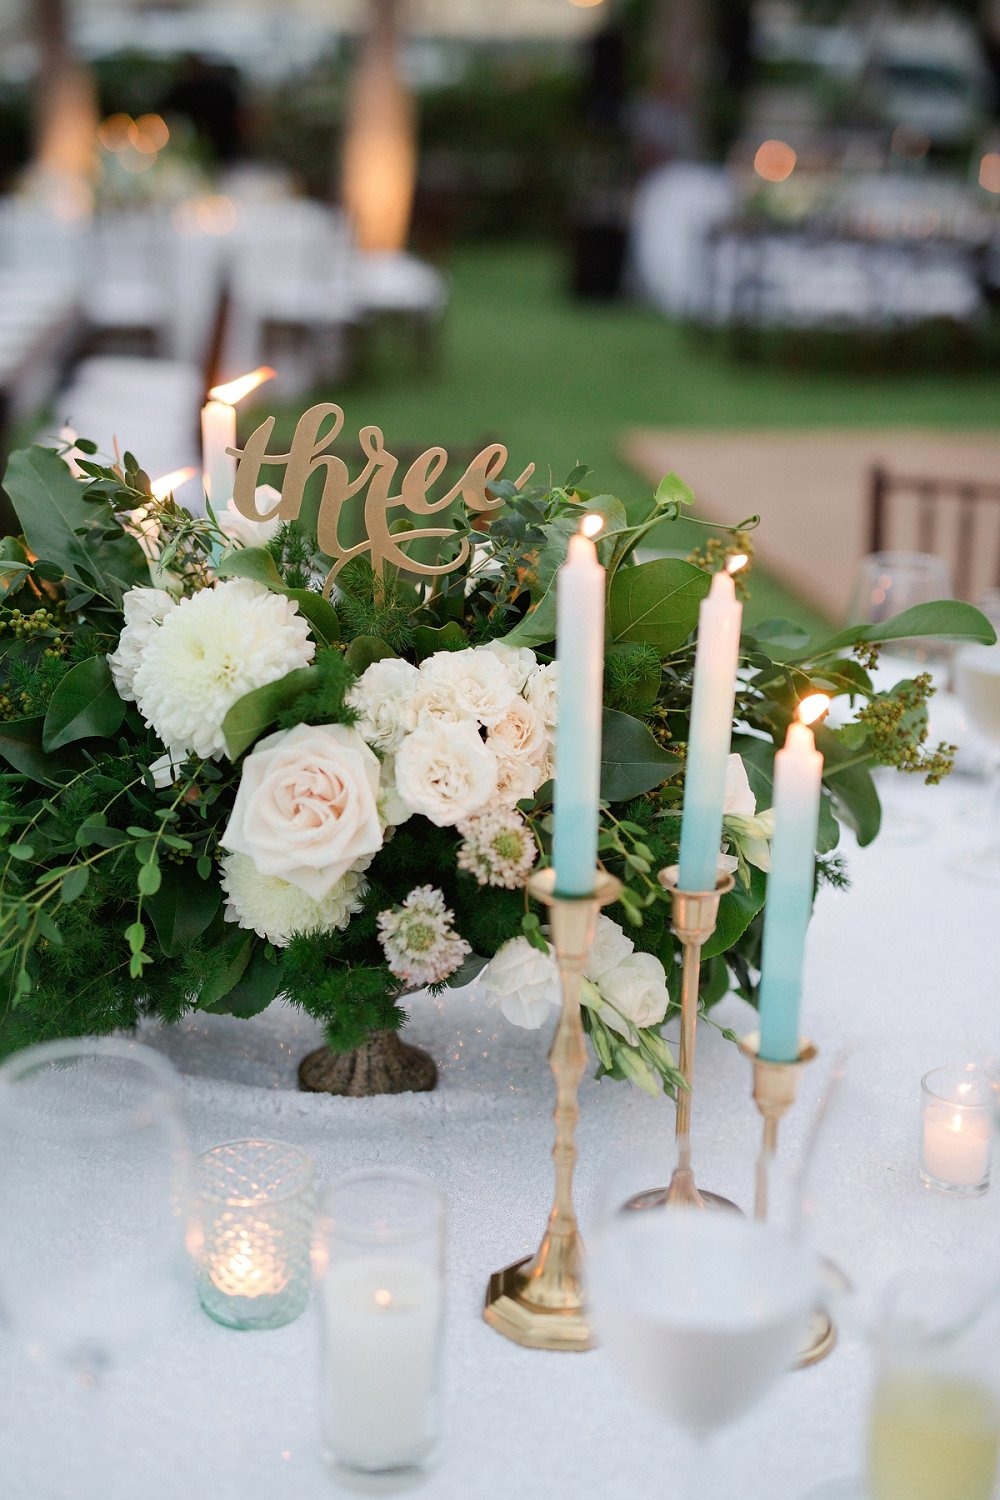 Romantic table decor with candle light